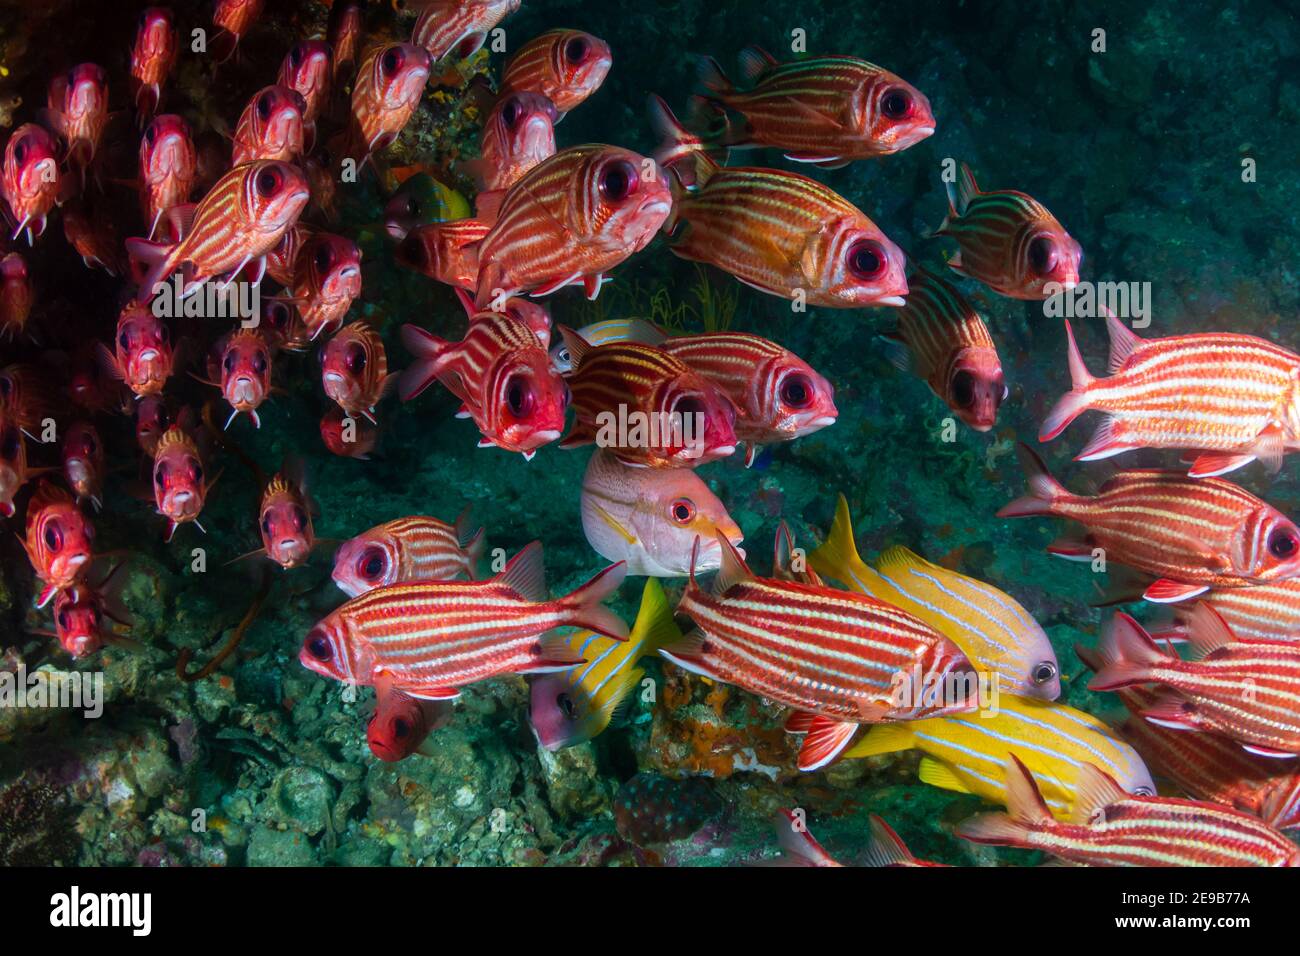 School of Squirrelfish (Sargocentron sp.) on a tropical coral reef. Stock Photo